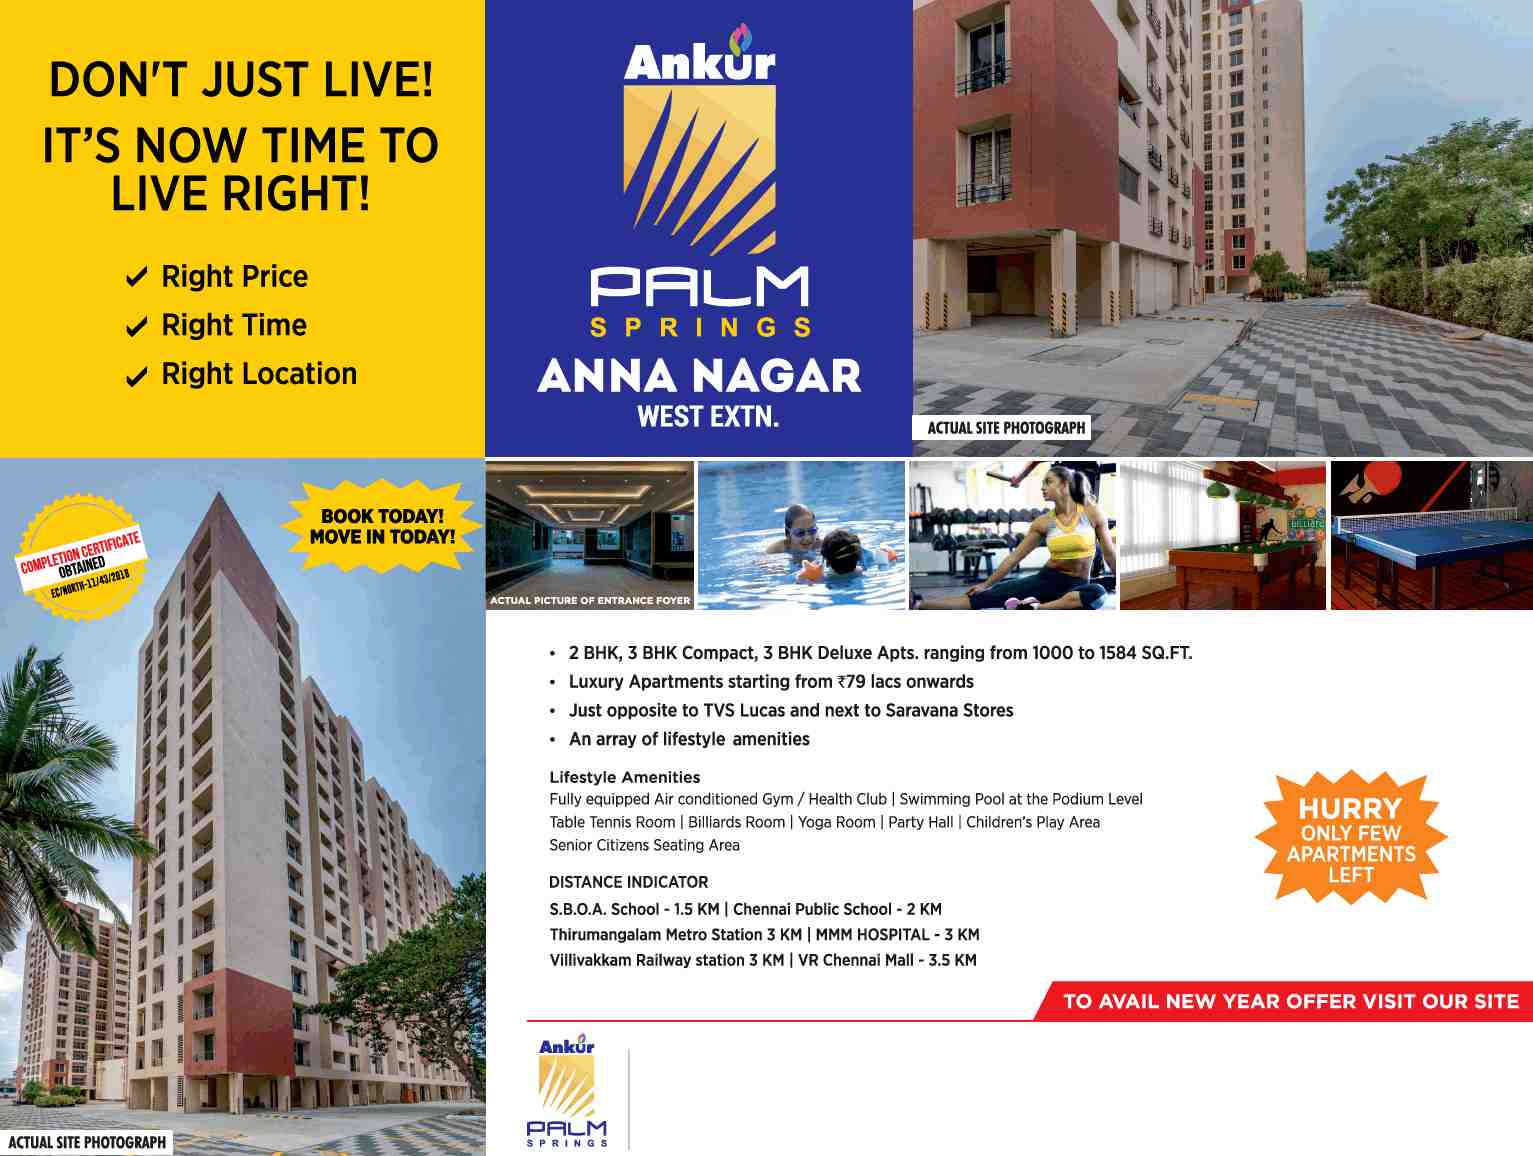 Completion certificate obtained for Ankur Palm Springs in Chennai Update